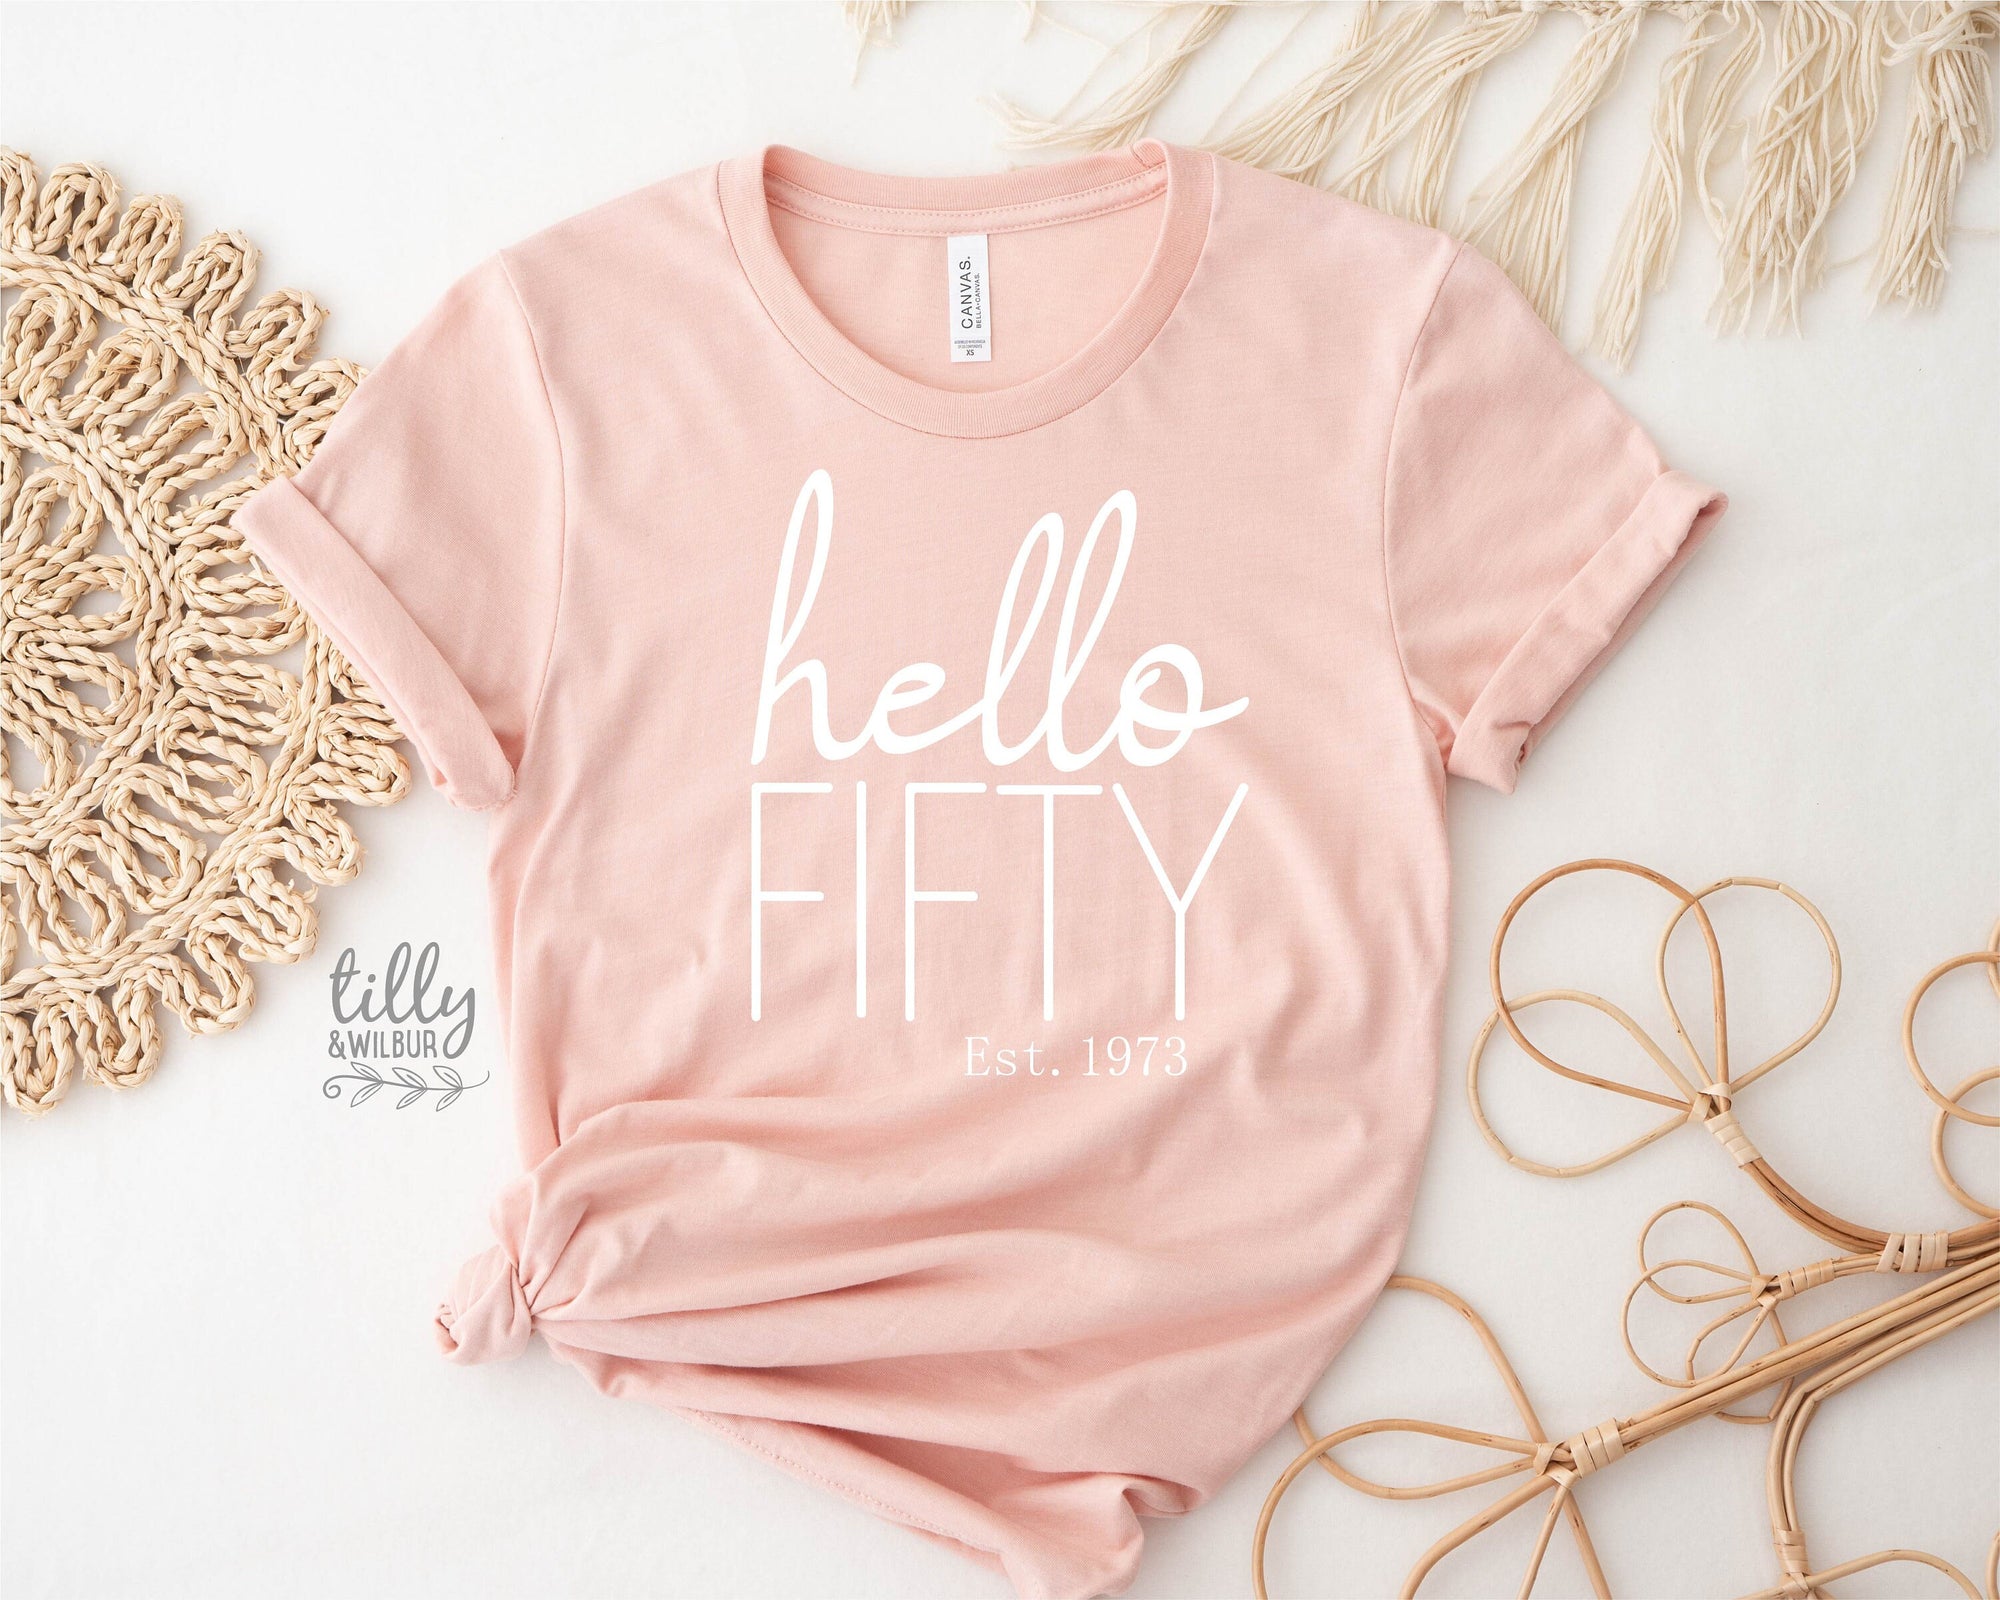 50th Birthday T-Shirt, Hello Fifty Est, Personalised Year, 50 And Fabulous T-Shirt, Women's 50th Birthday T-Shirt, Women's 50th Birthday